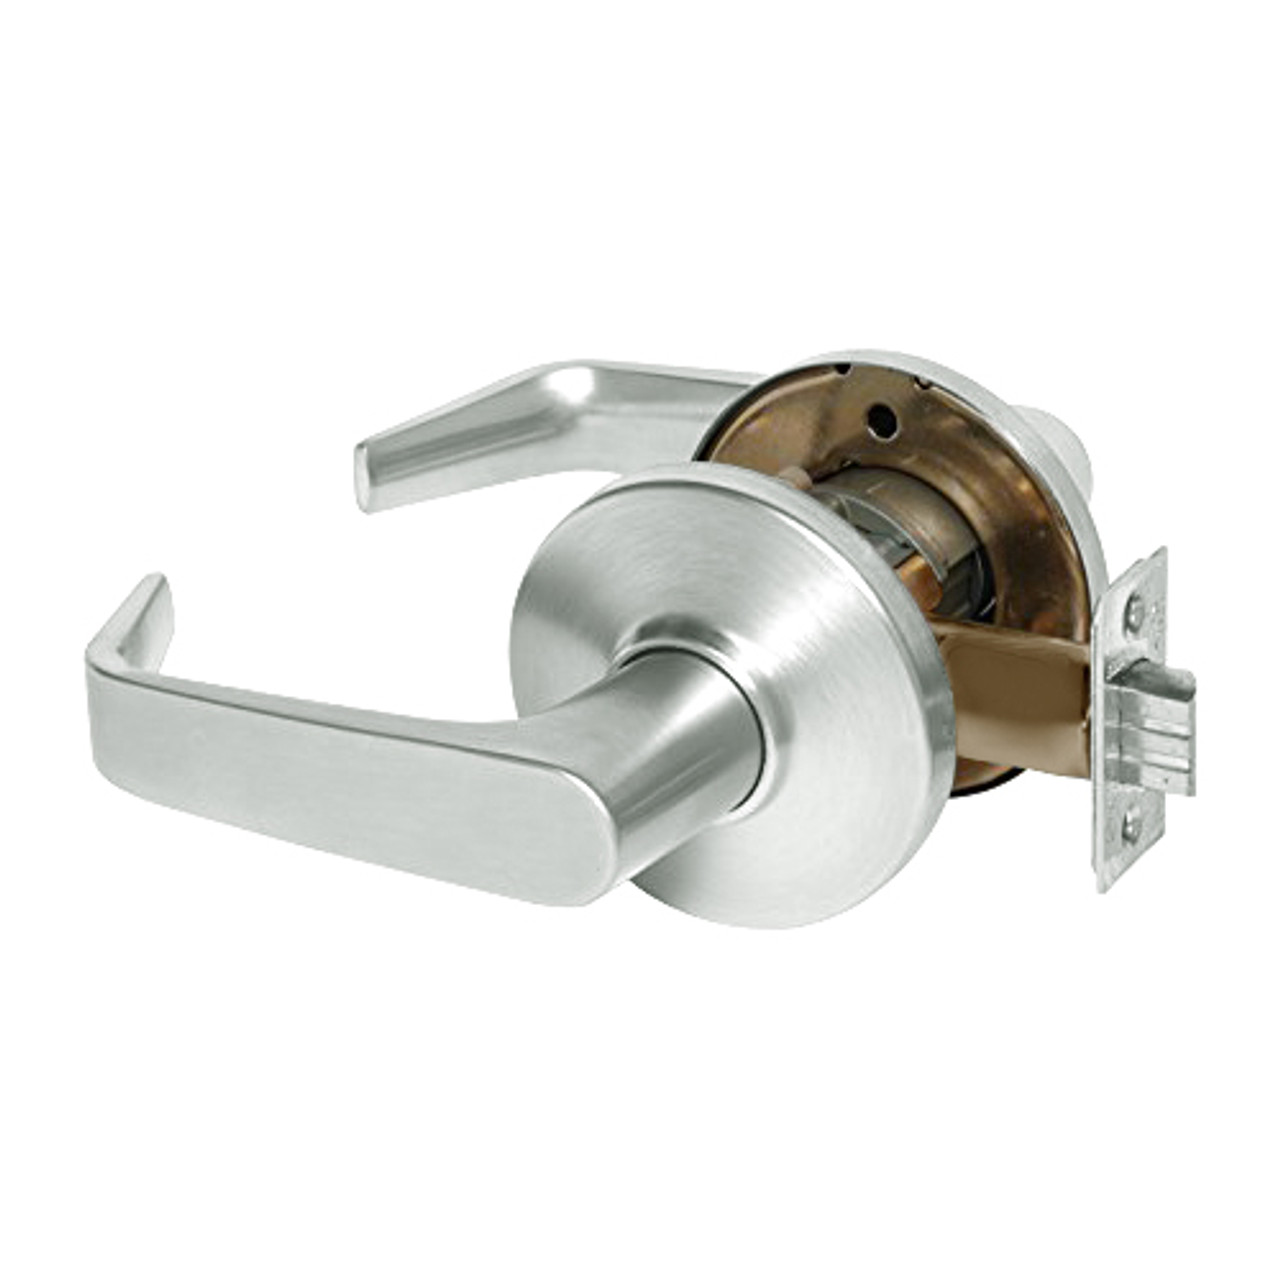 9K30NX15DSTK618 Best 9K Series Passage Heavy Duty Cylindrical Lever Locks with Contour Angle with Return Lever Design in Bright Nickel